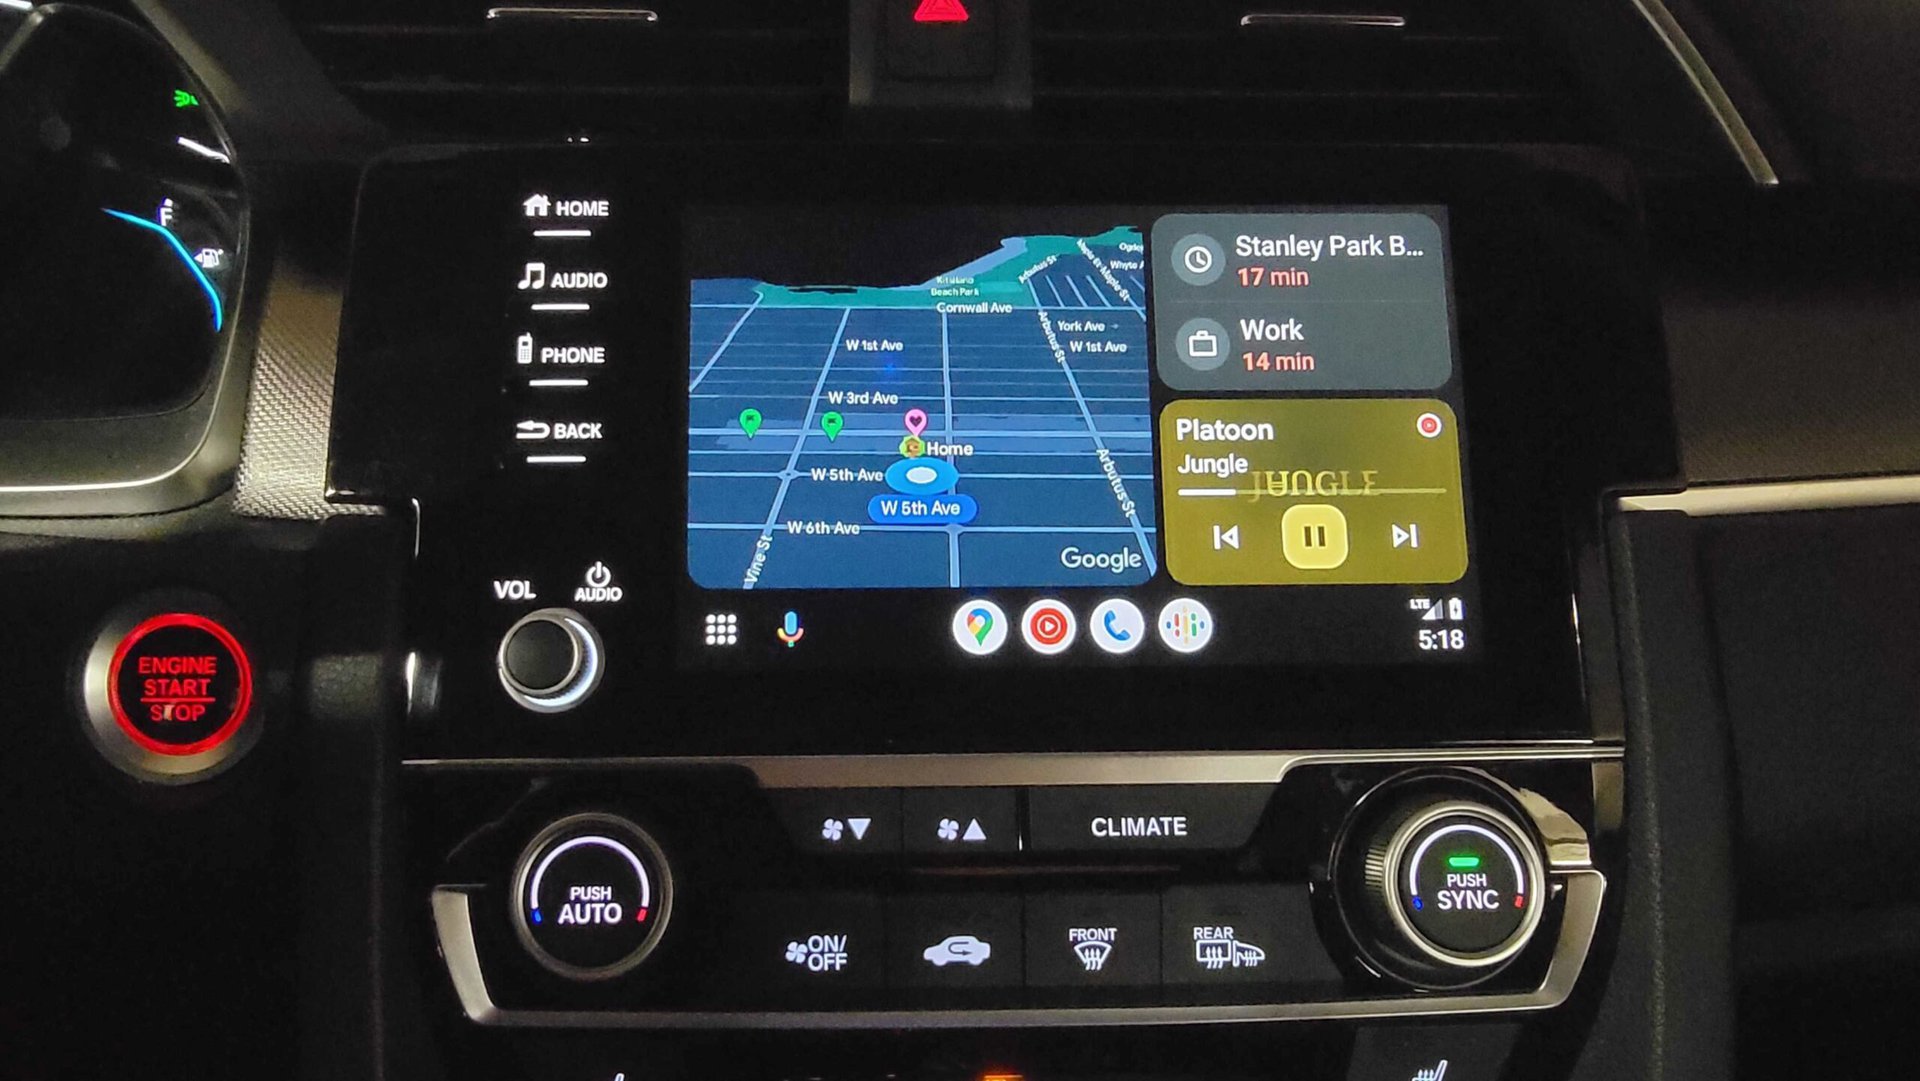 Exploring Android Auto 10.7: What's New and How to Update